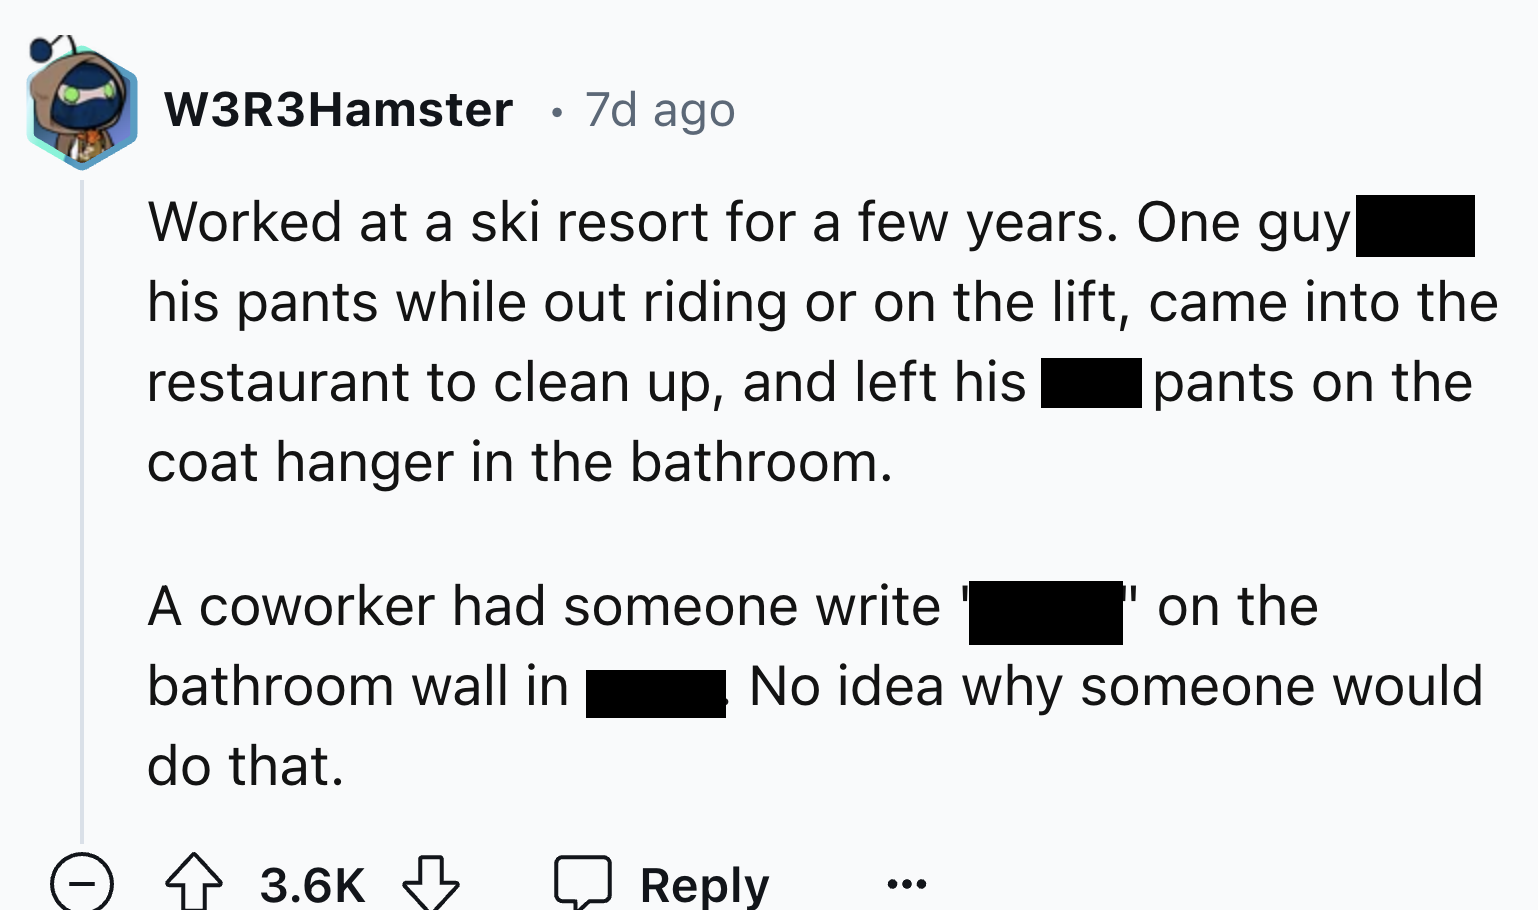 screenshot - W3R3Hamster 7d ago Worked at a ski resort for a few years. One guy his pants while out riding or on the lift, came into the restaurant to clean up, and left his coat hanger in the bathroom. A coworker had someone write bathroom wall in do tha